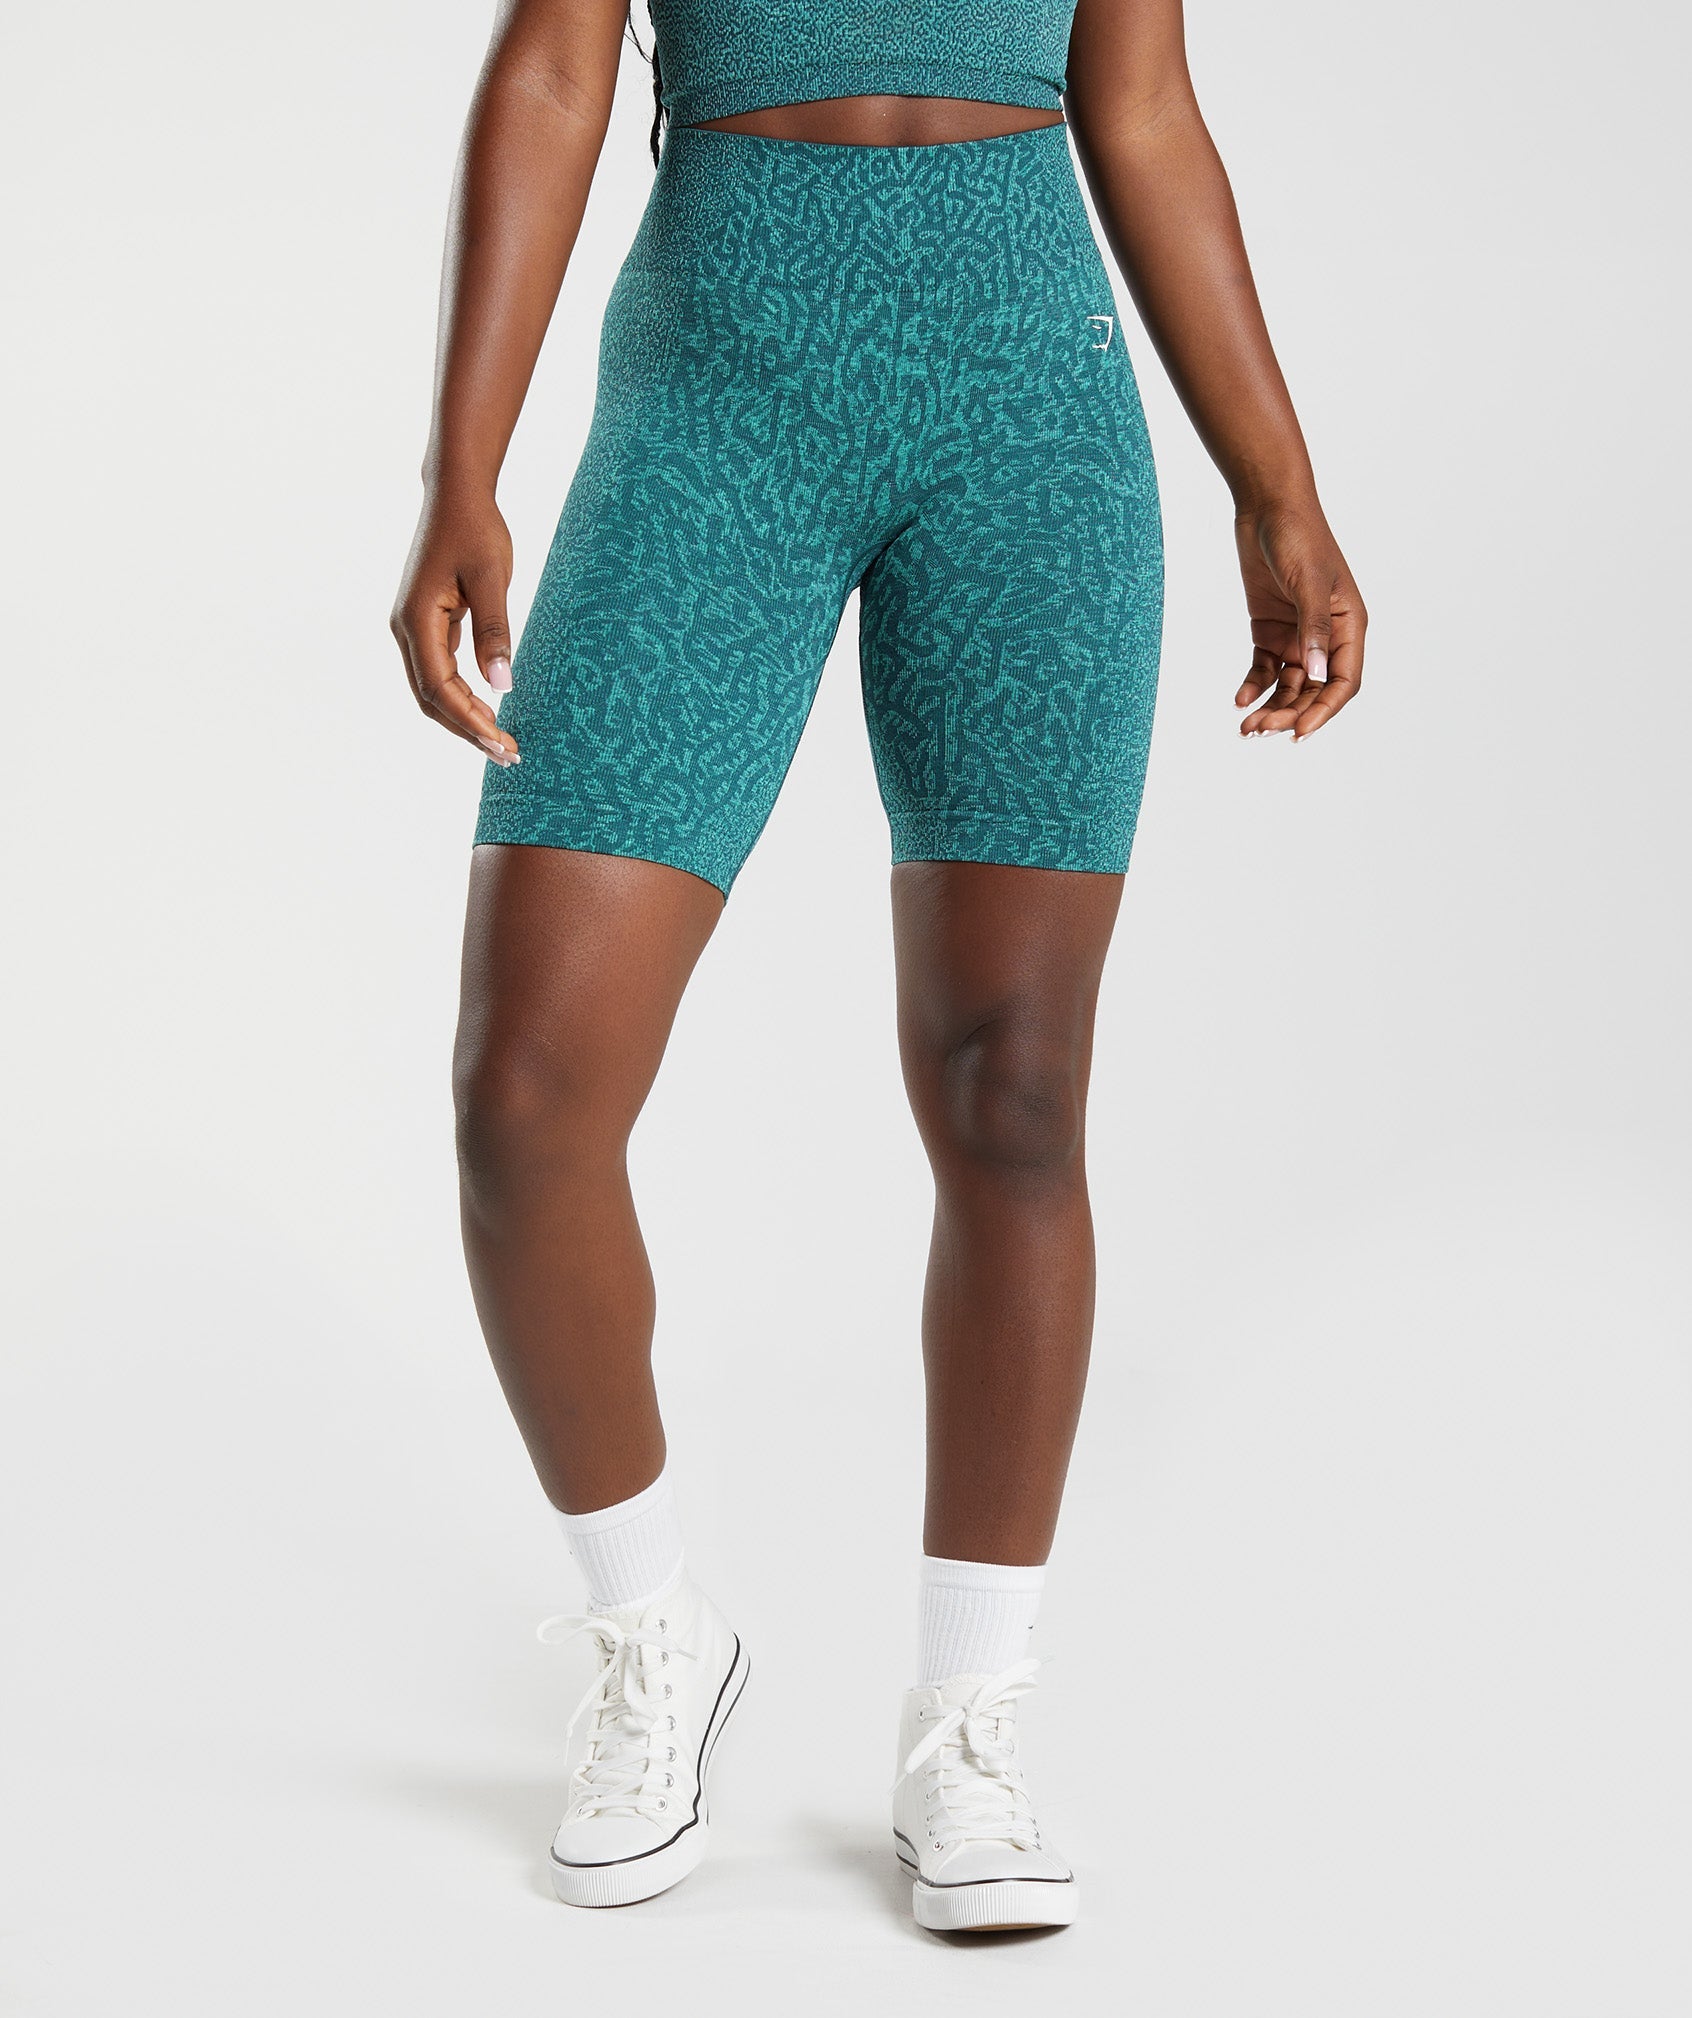 Adapt Animal Seamless Cycling Shorts in Reef | Winter Teal - view 1